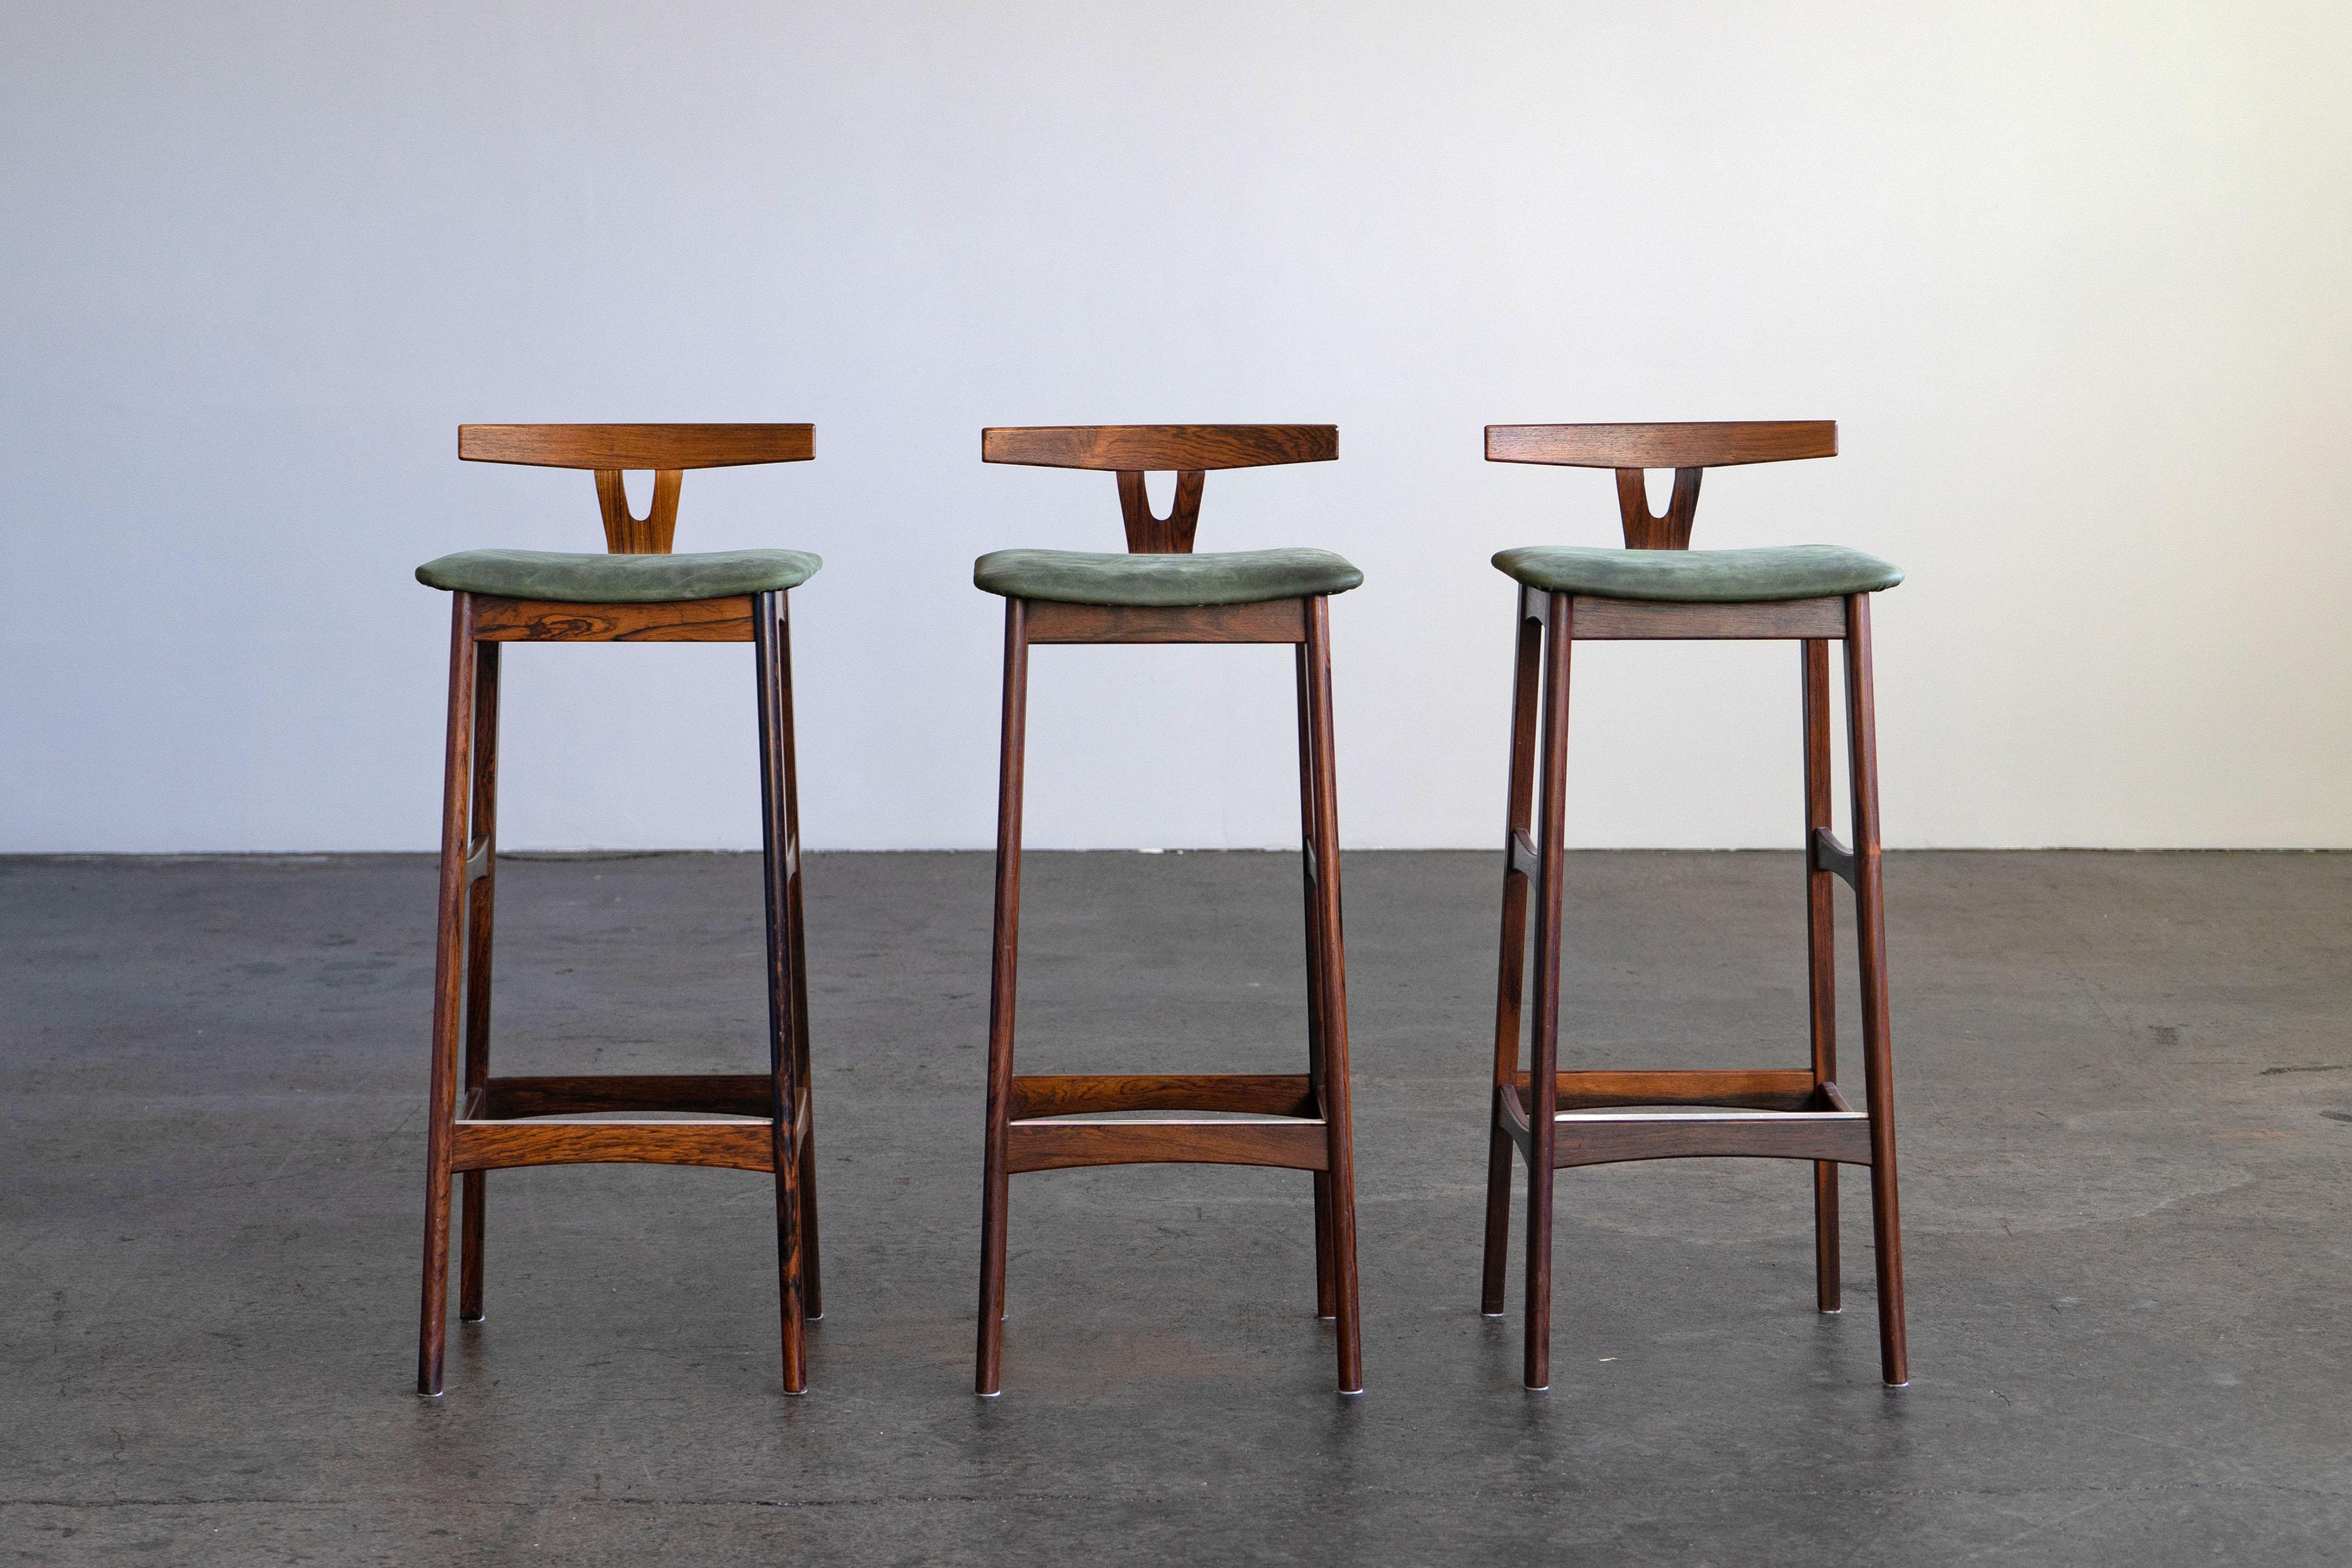 Set of three beautiful rosewood bar stools with green leather seats. The stools were designed by Knud Bent and produced by the Danish company Dyrlund in the 1960s. This set comes with a CITES-Certificate, which is transfered to the buyer.

Set